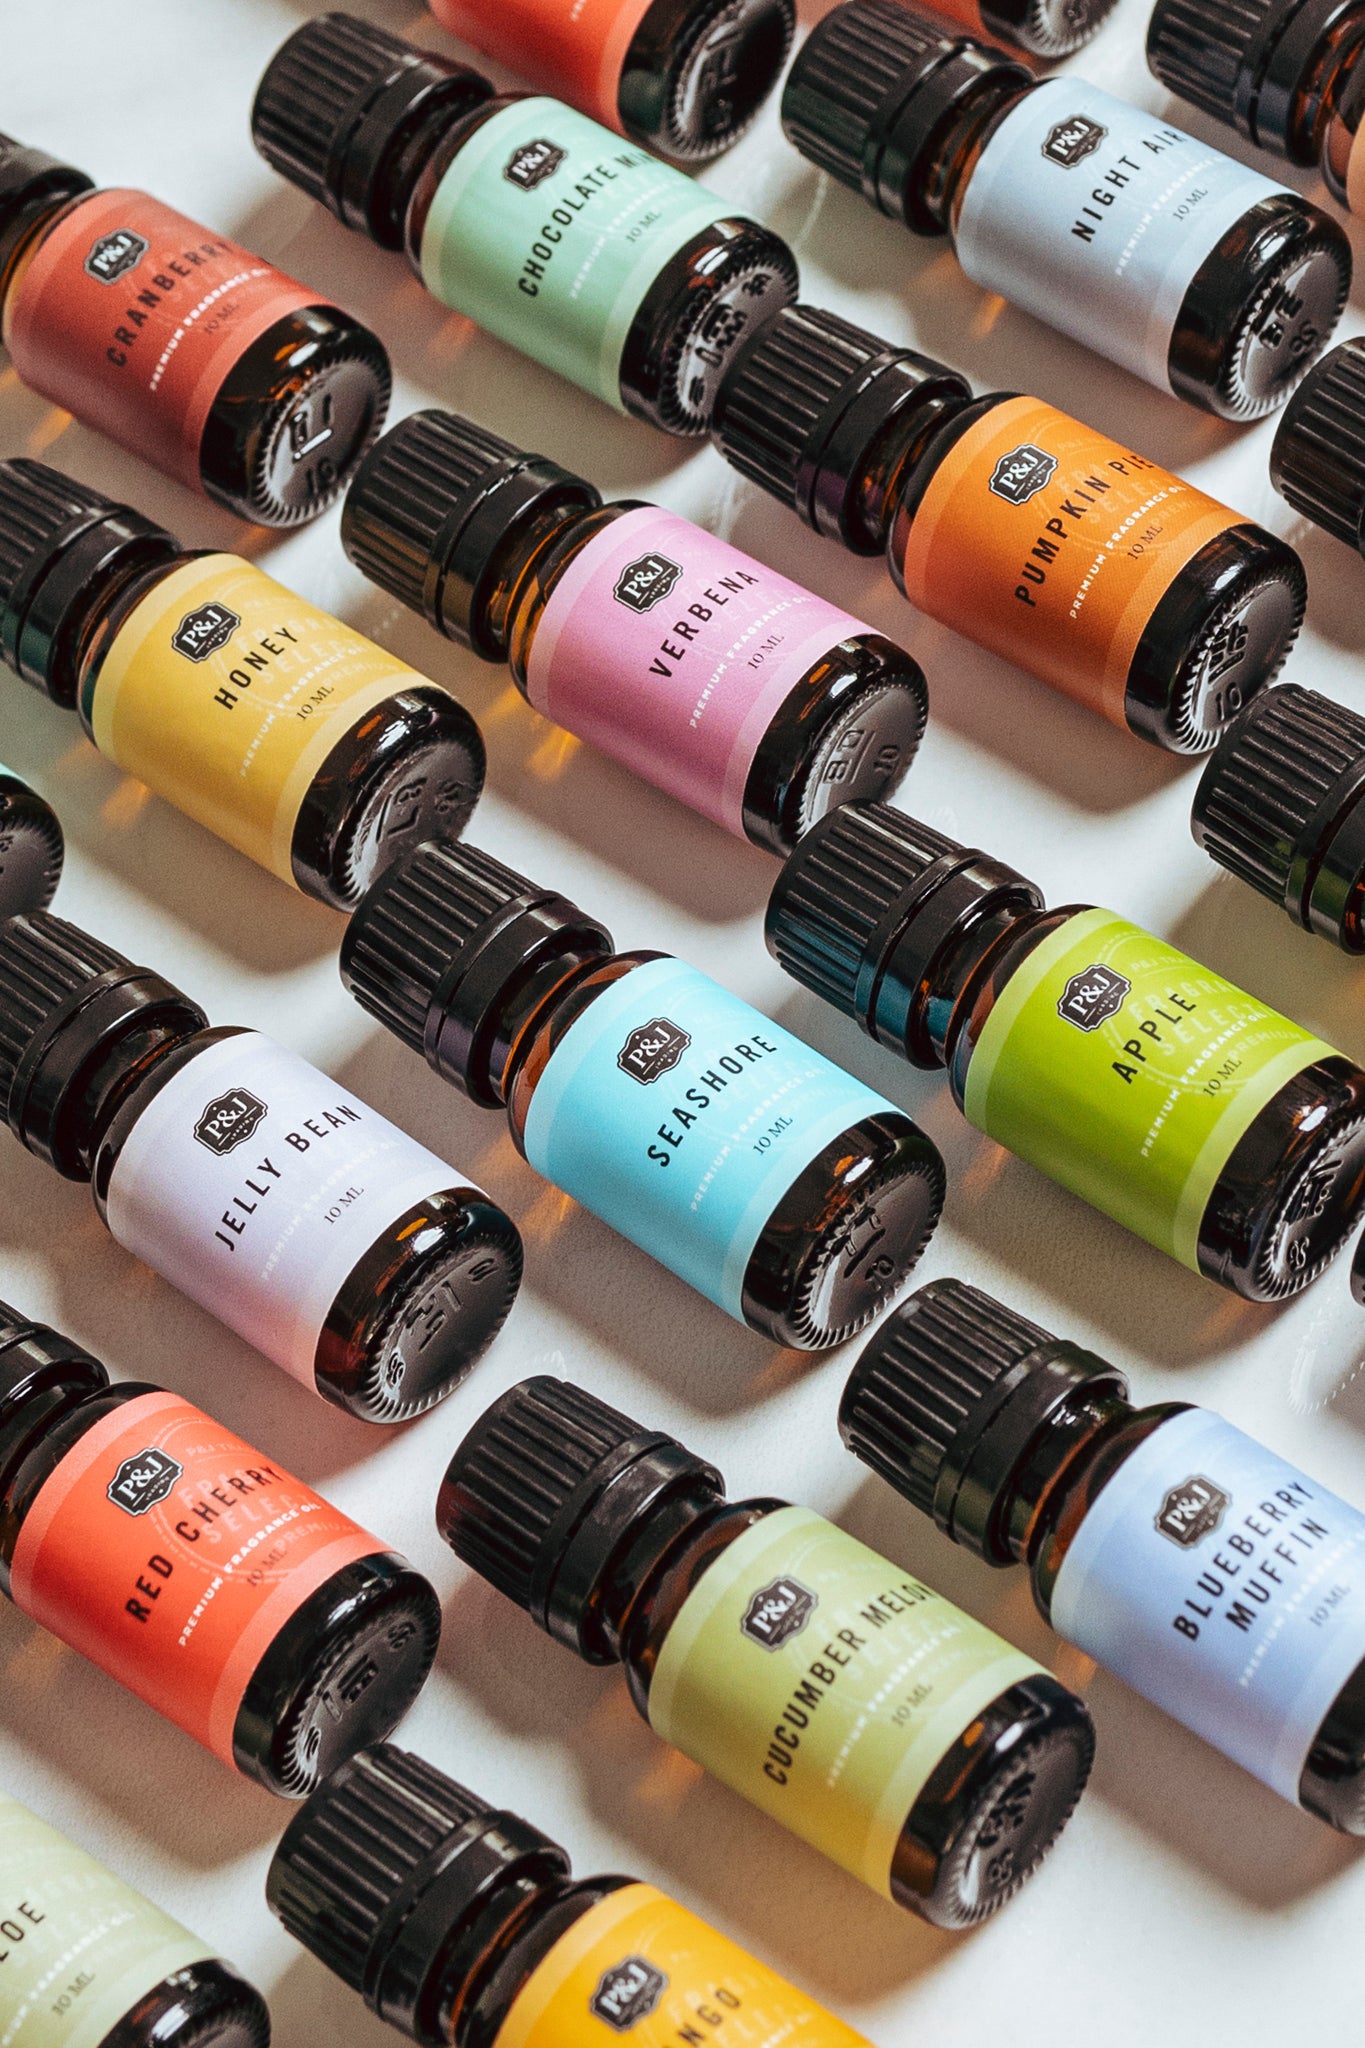 P&J Fragrance Oils for Home and How to Use